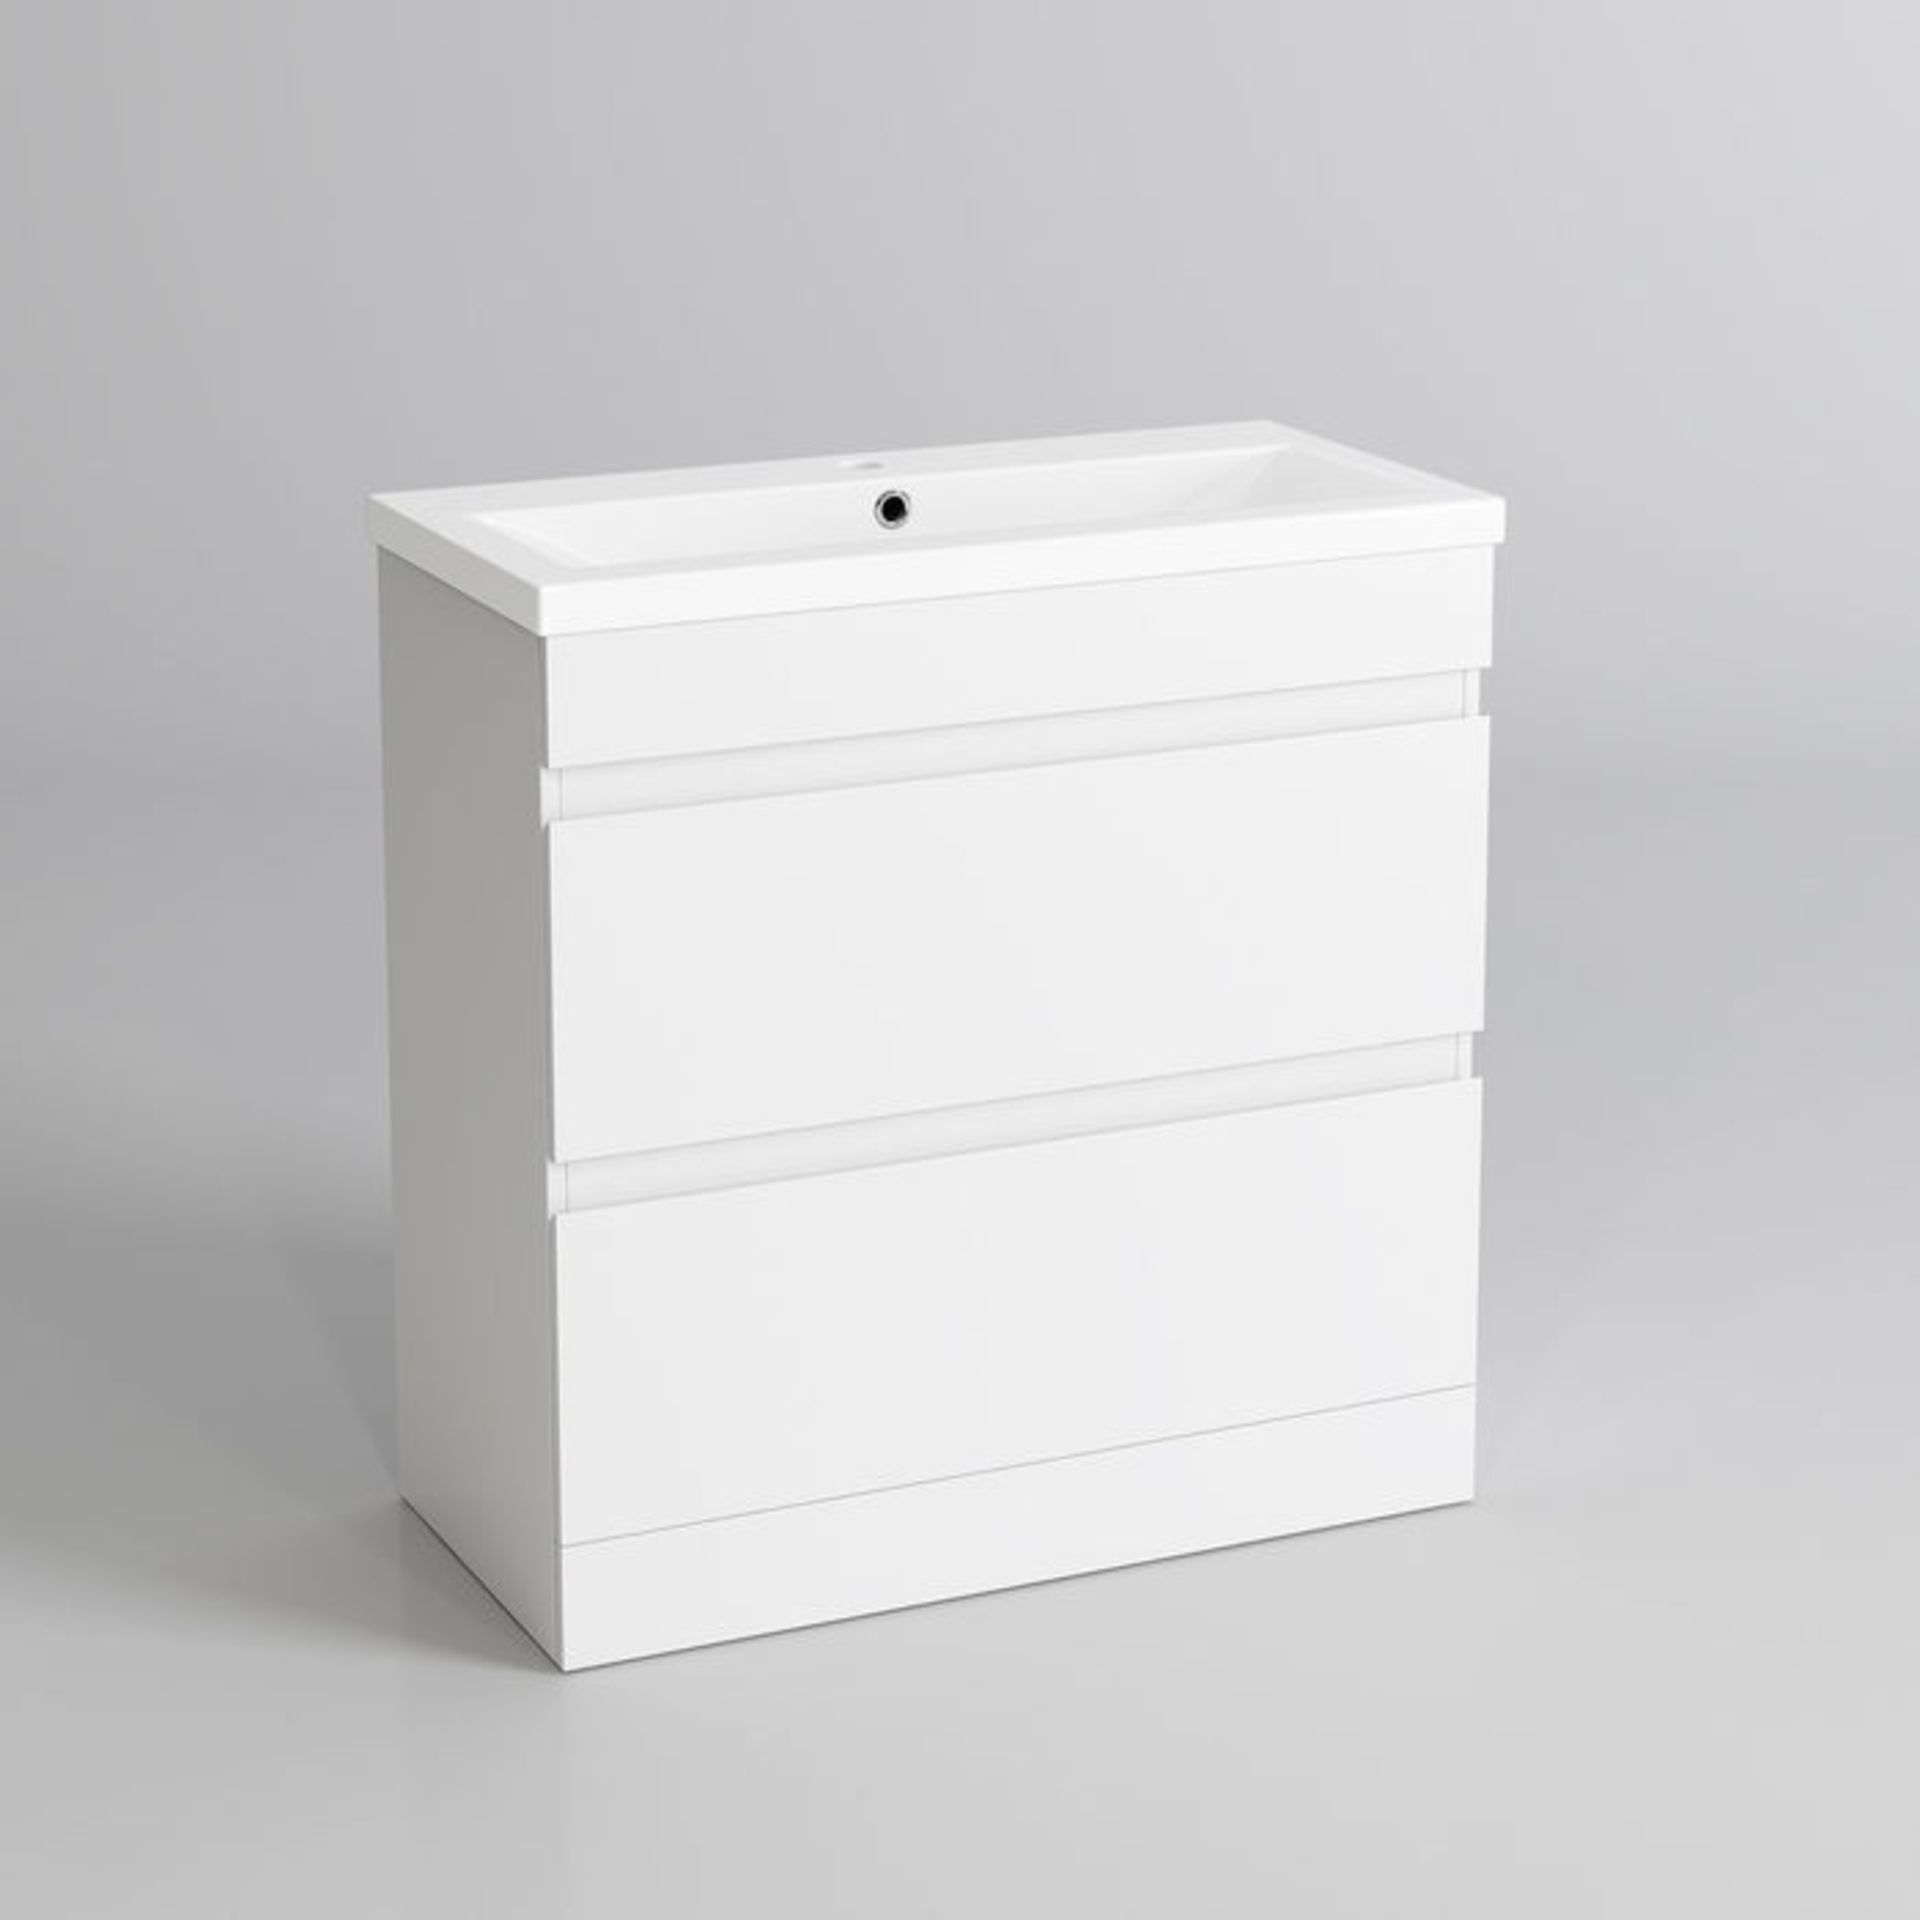 (PA22) 800mm Trent High Gloss White Double Drawer Basin Cabinet - Floor Standing. RRP £499.99. COMES - Image 2 of 5